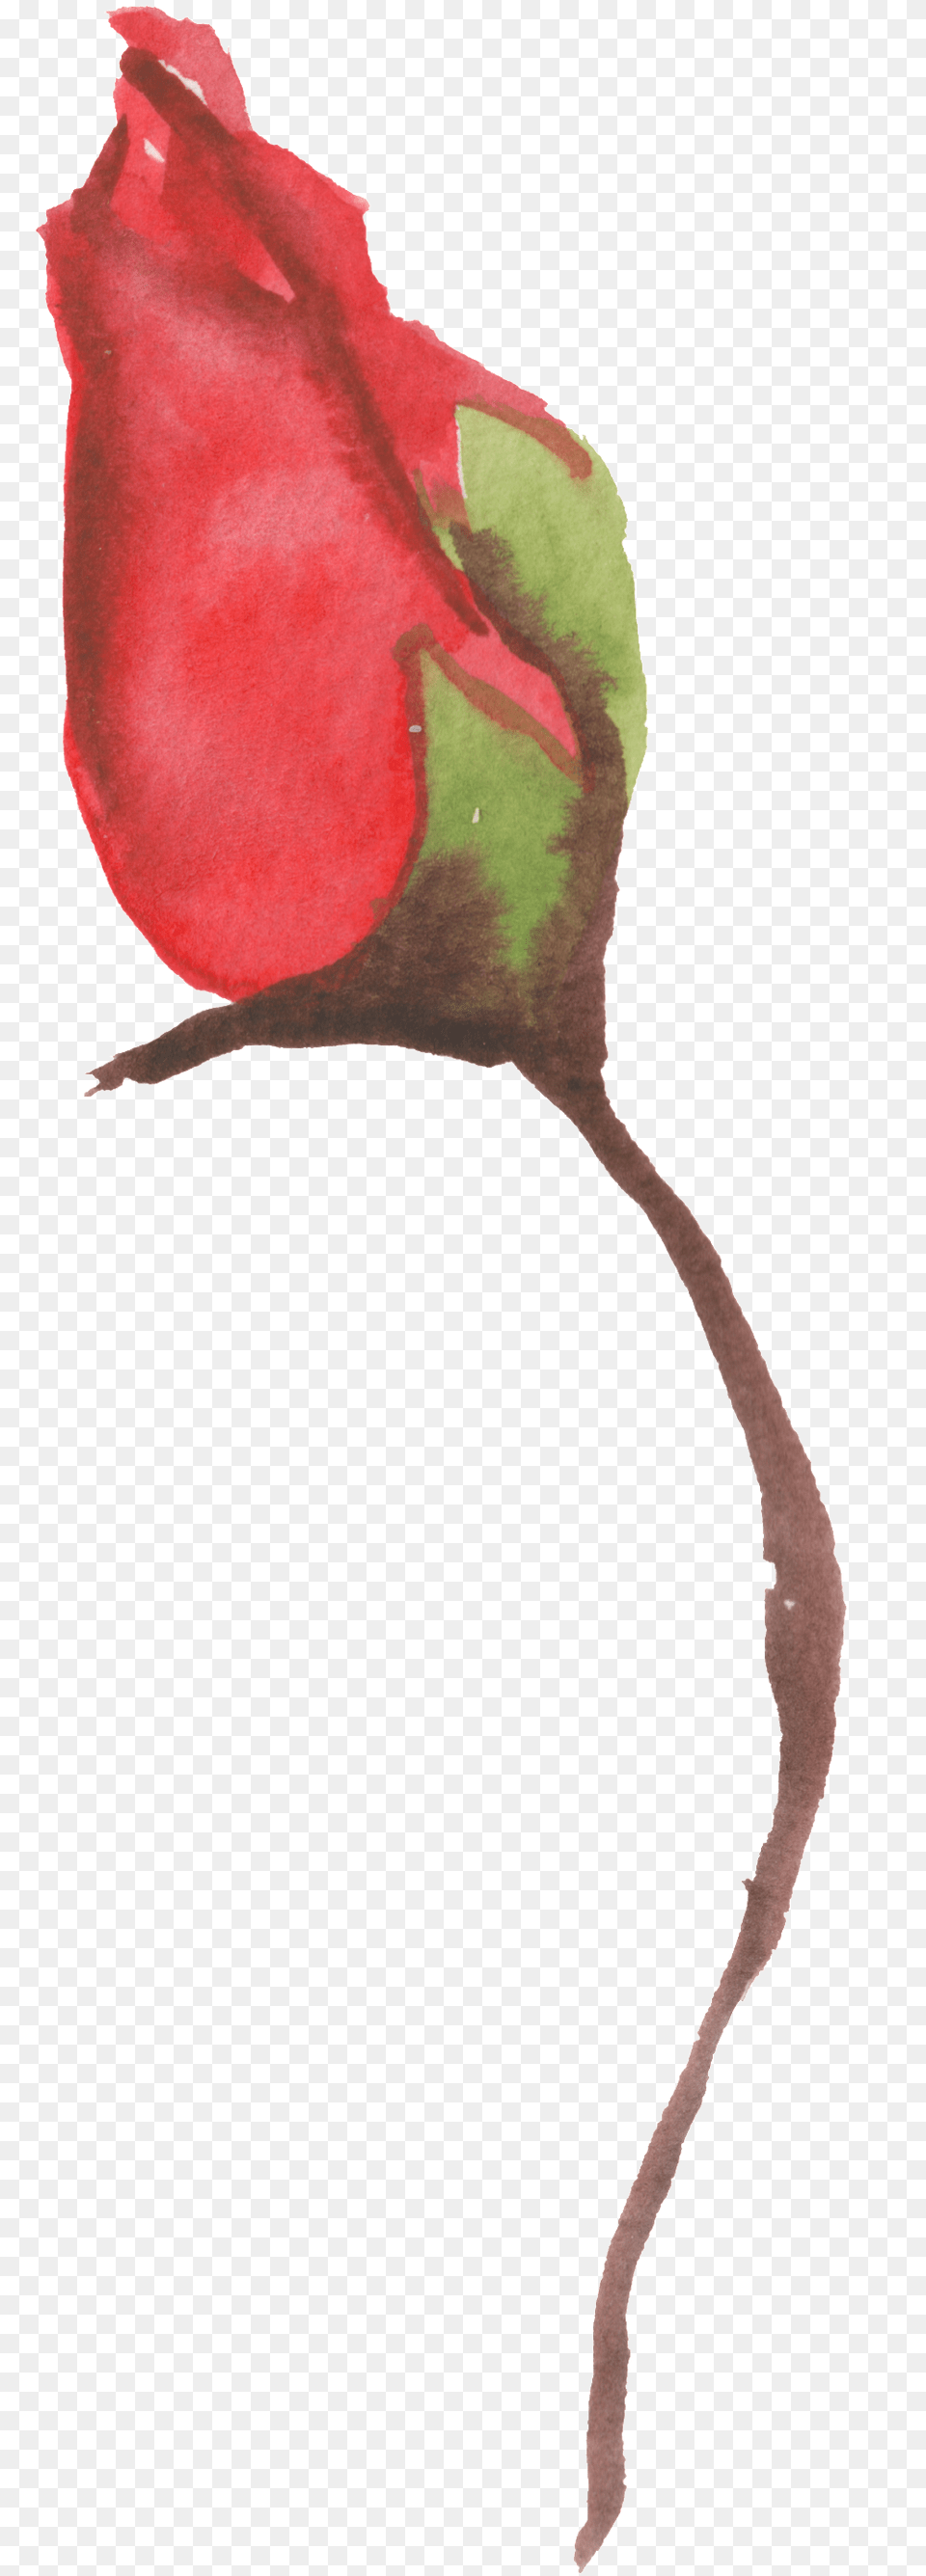 Romantic And Ambiguous To Put Roses Transparent Decorative Watercolor Painting, Bud, Flower, Petal, Plant Png Image